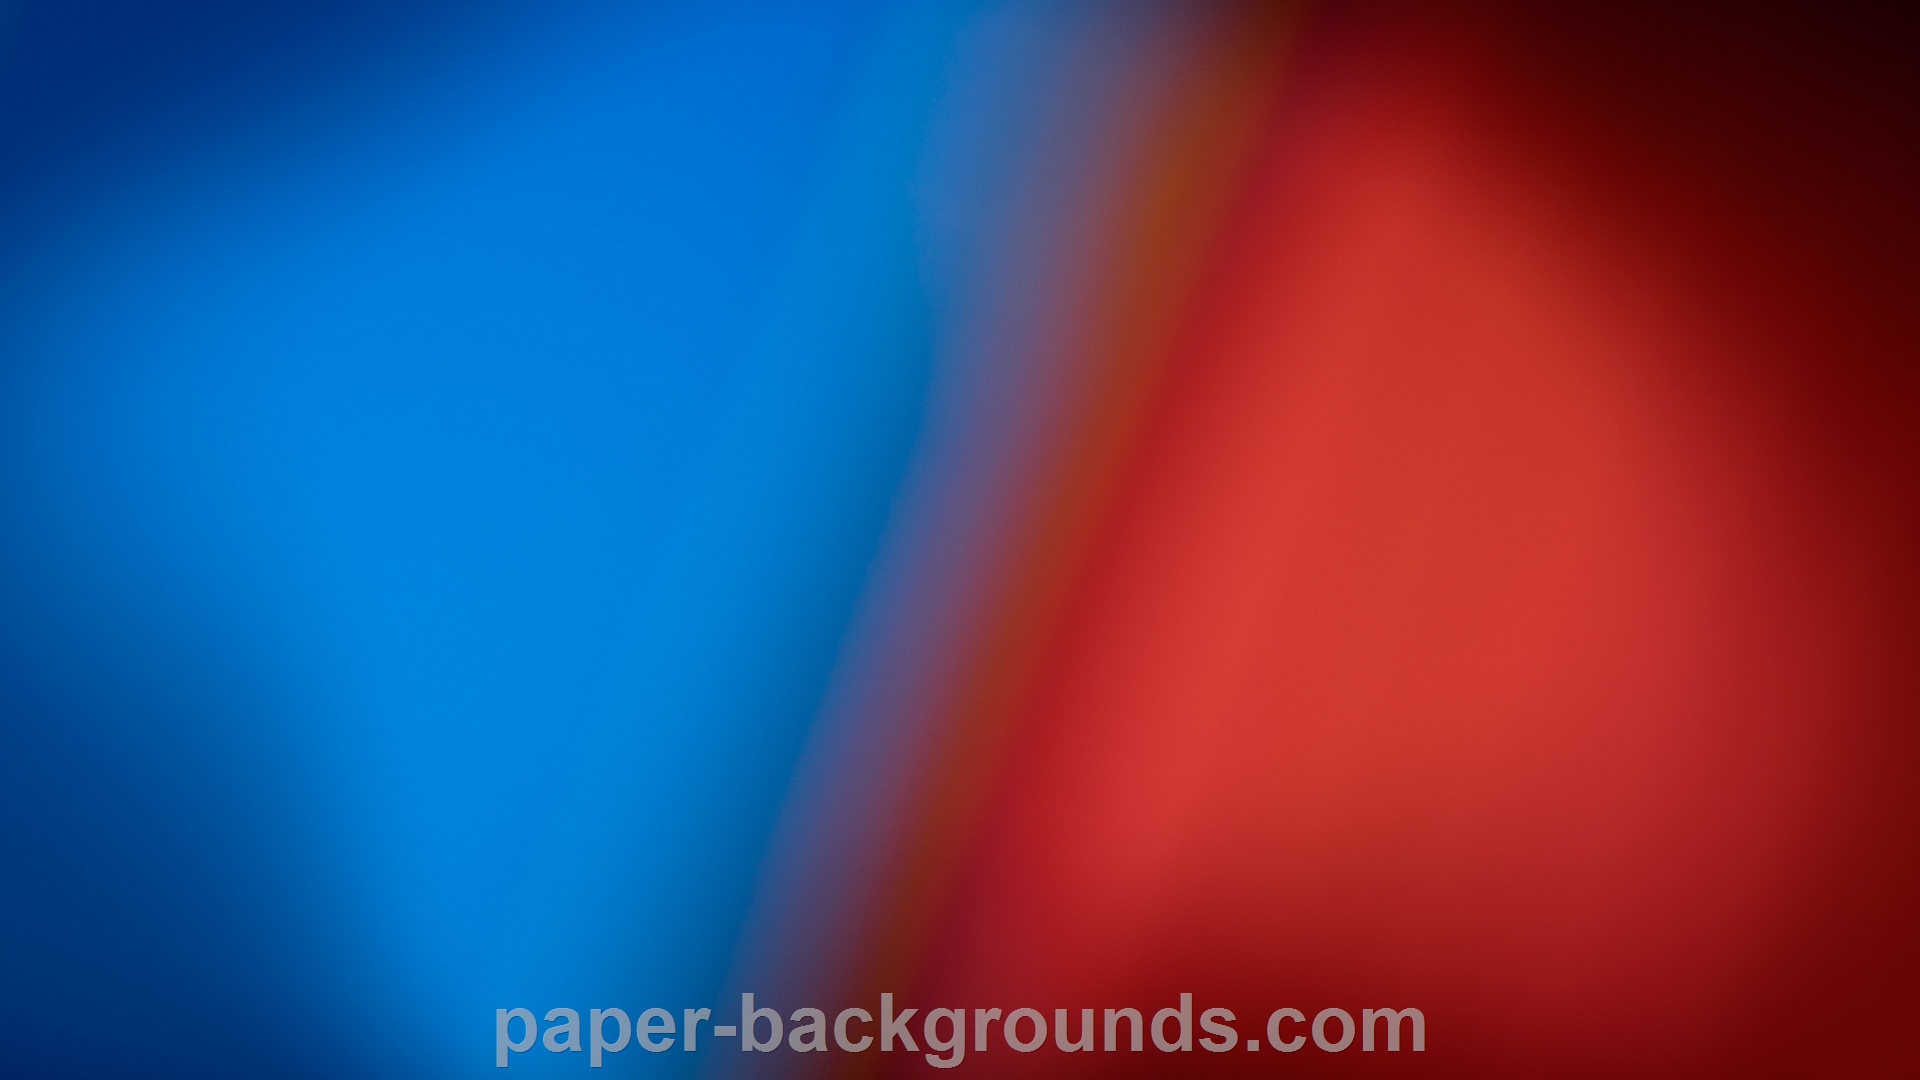 Free download wallpaper abstract background red blue backgrounds